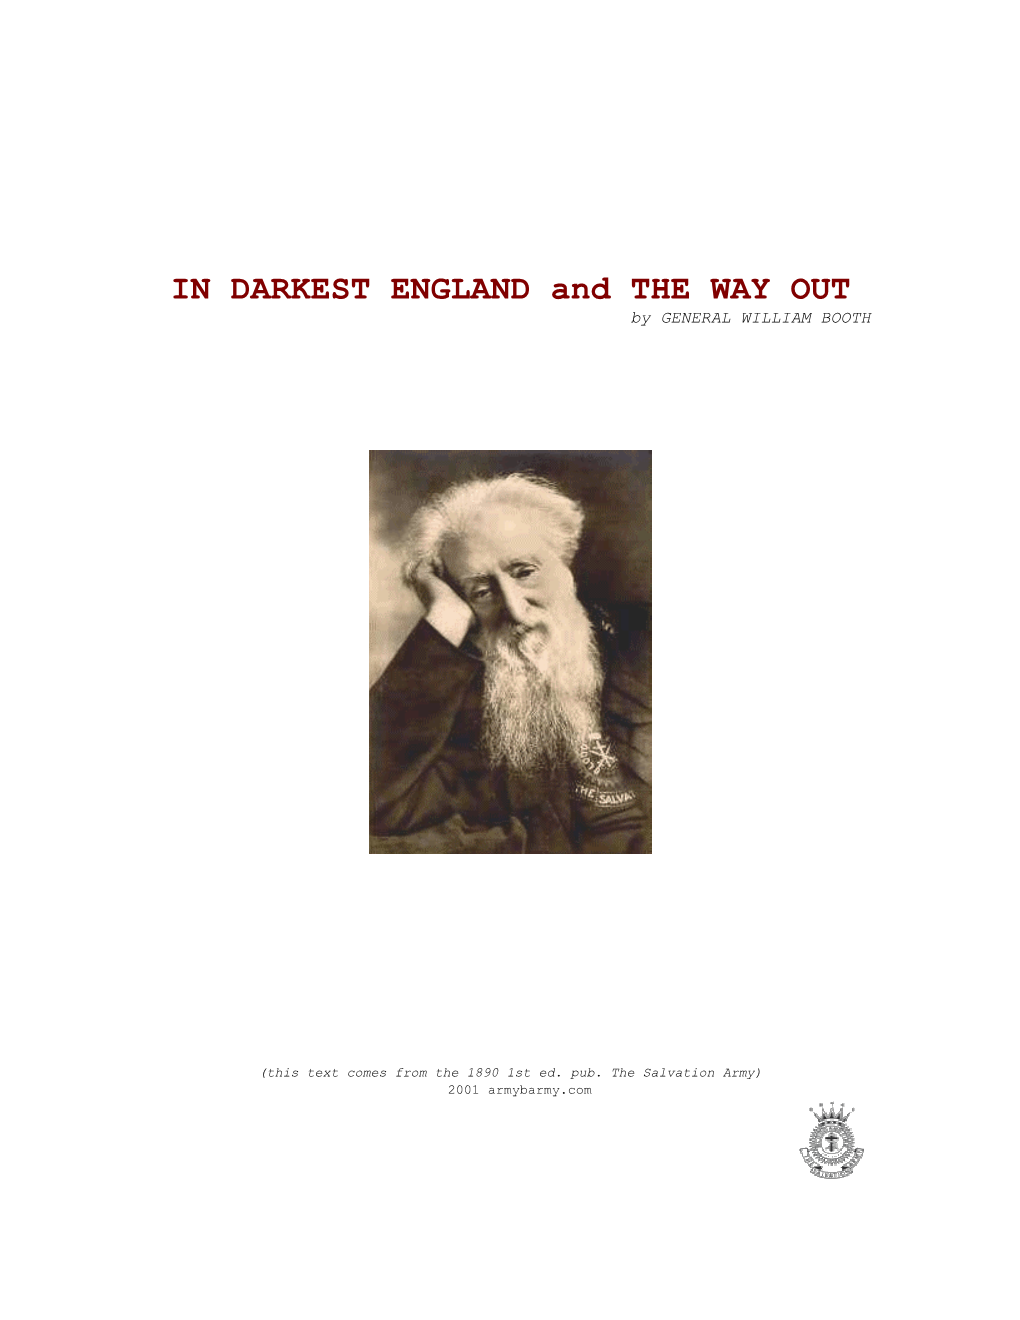 IN DARKEST ENGLAND and the WAY out by GENERAL WILLIAM BOOTH